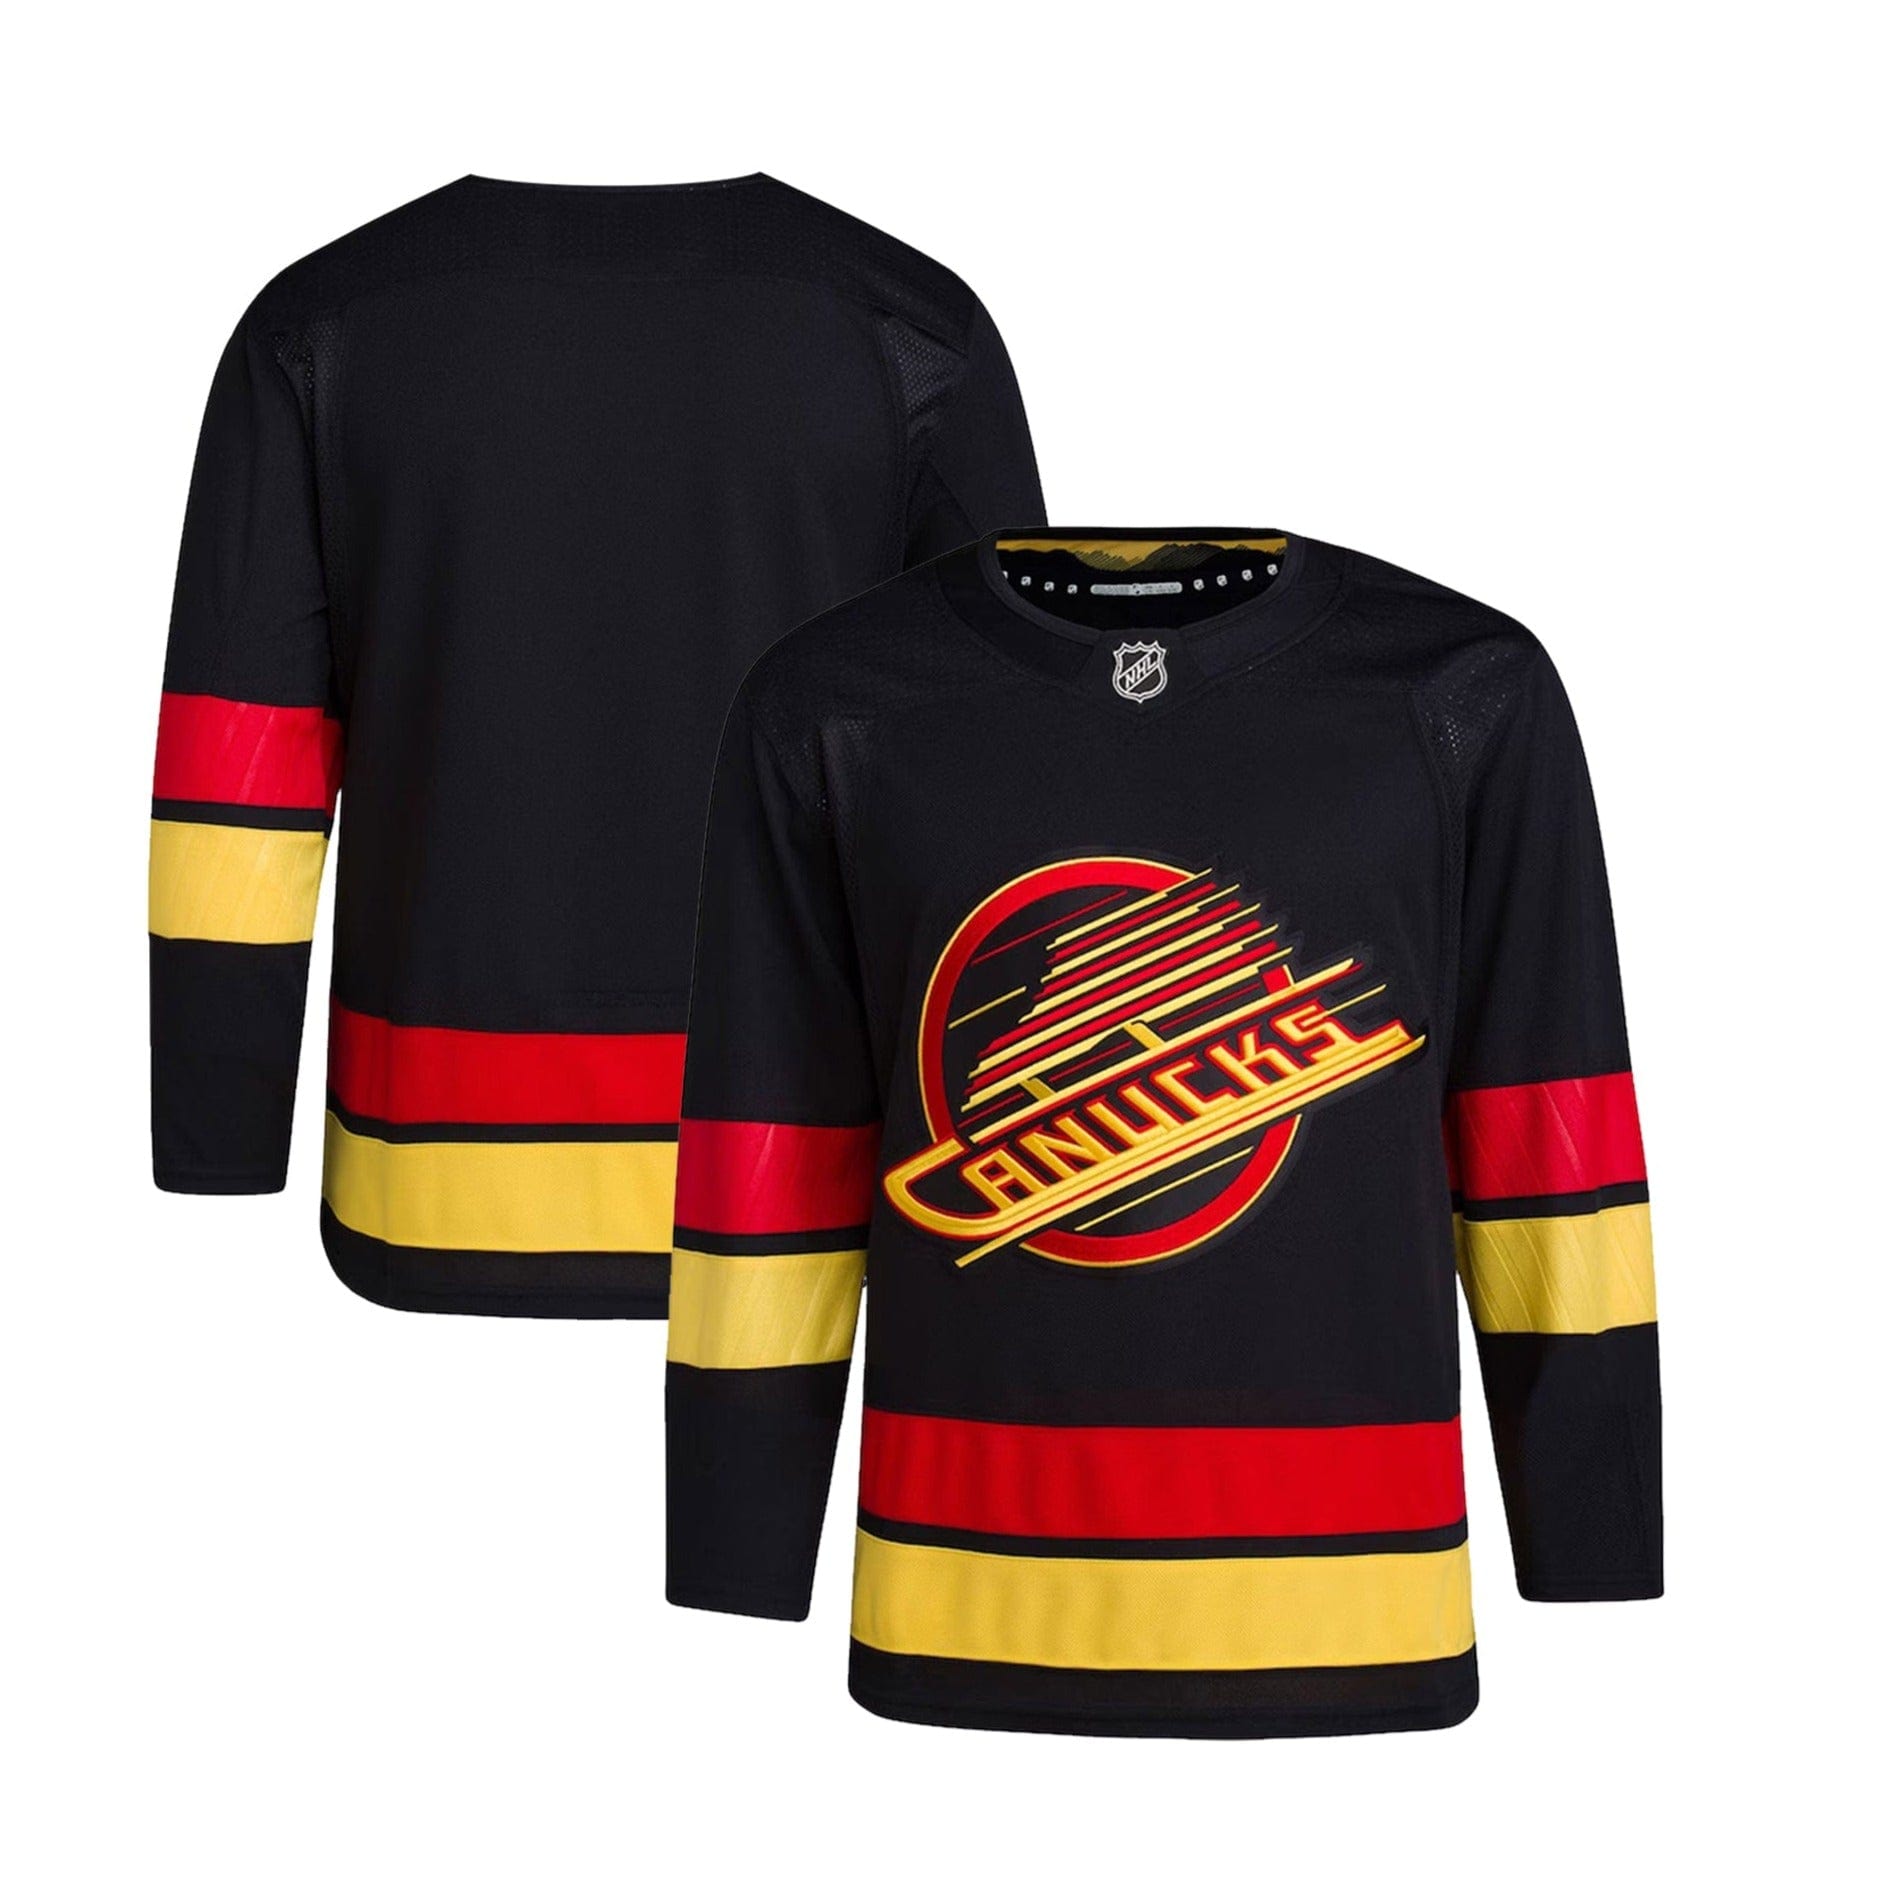  Outerstuff NHL NHL Vancouver Canucks Kids & Youth Boys Replica  Jersey-Home, Royal, Youth Small/Medium (8-12) : Sports & Outdoors